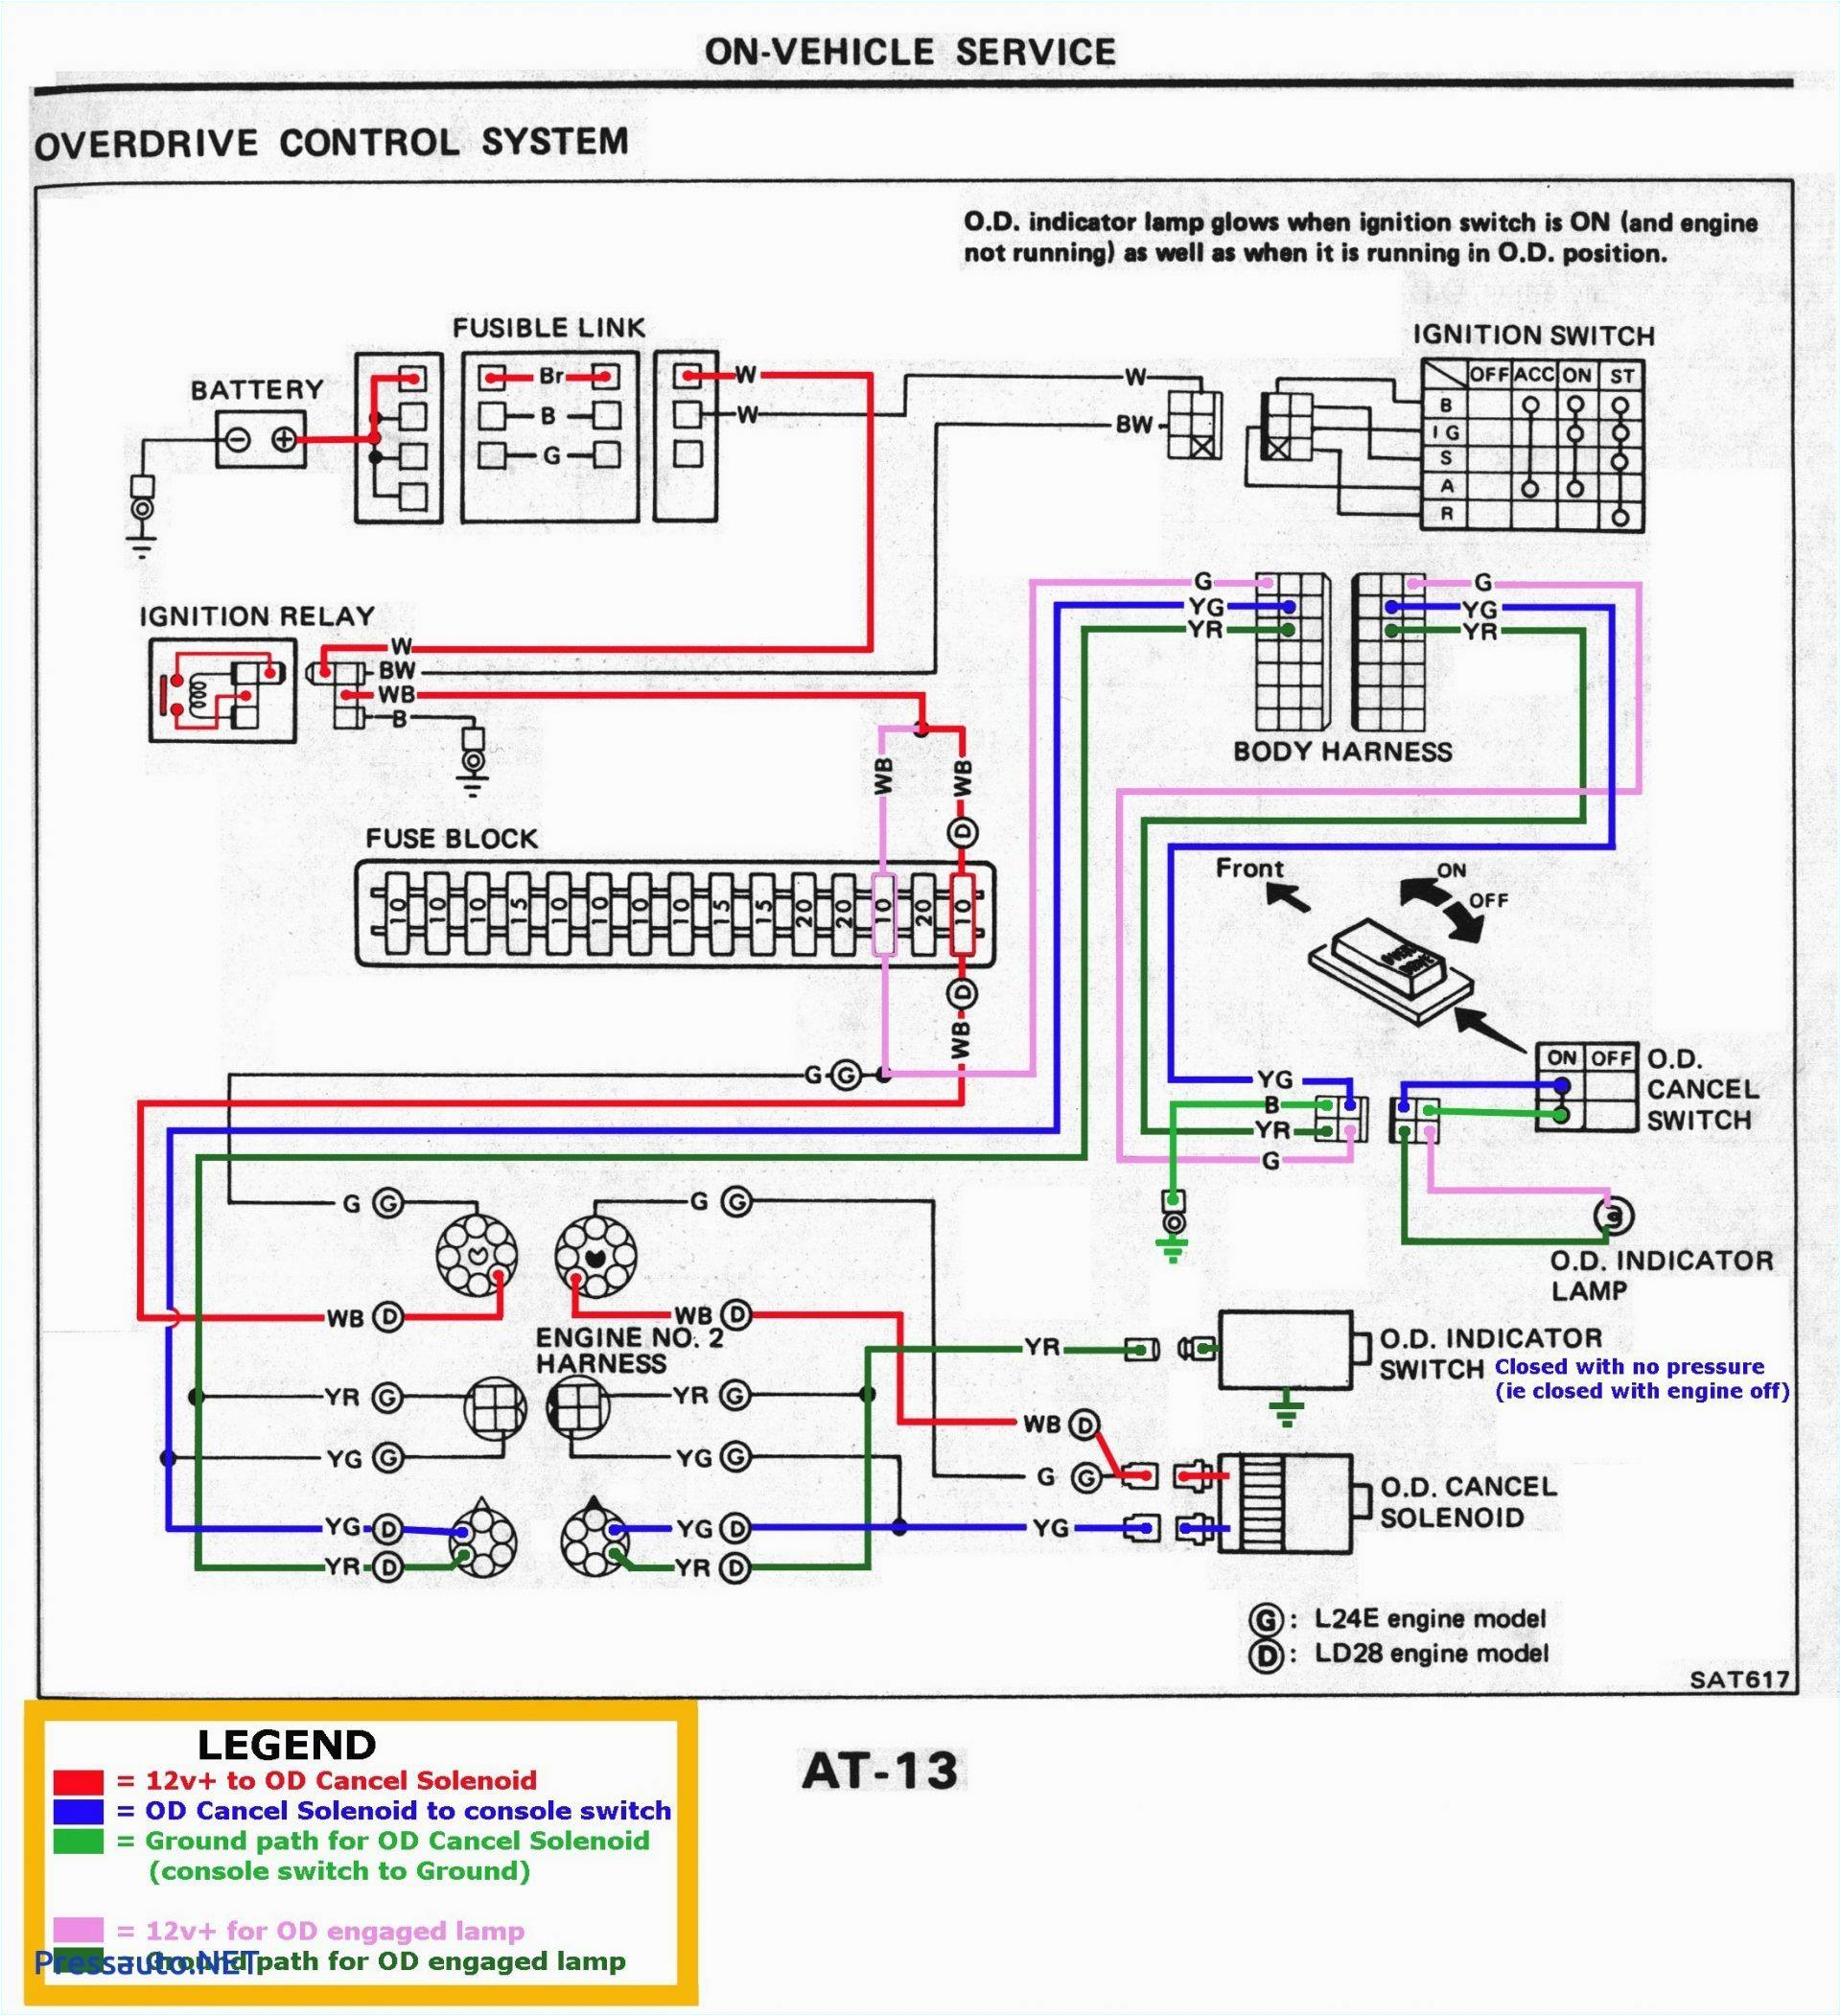 wiring diagram for 2002 chevy silverado also dodge ram trailer wiring diagram for 1979 chevy silverado as well as trailer wiring